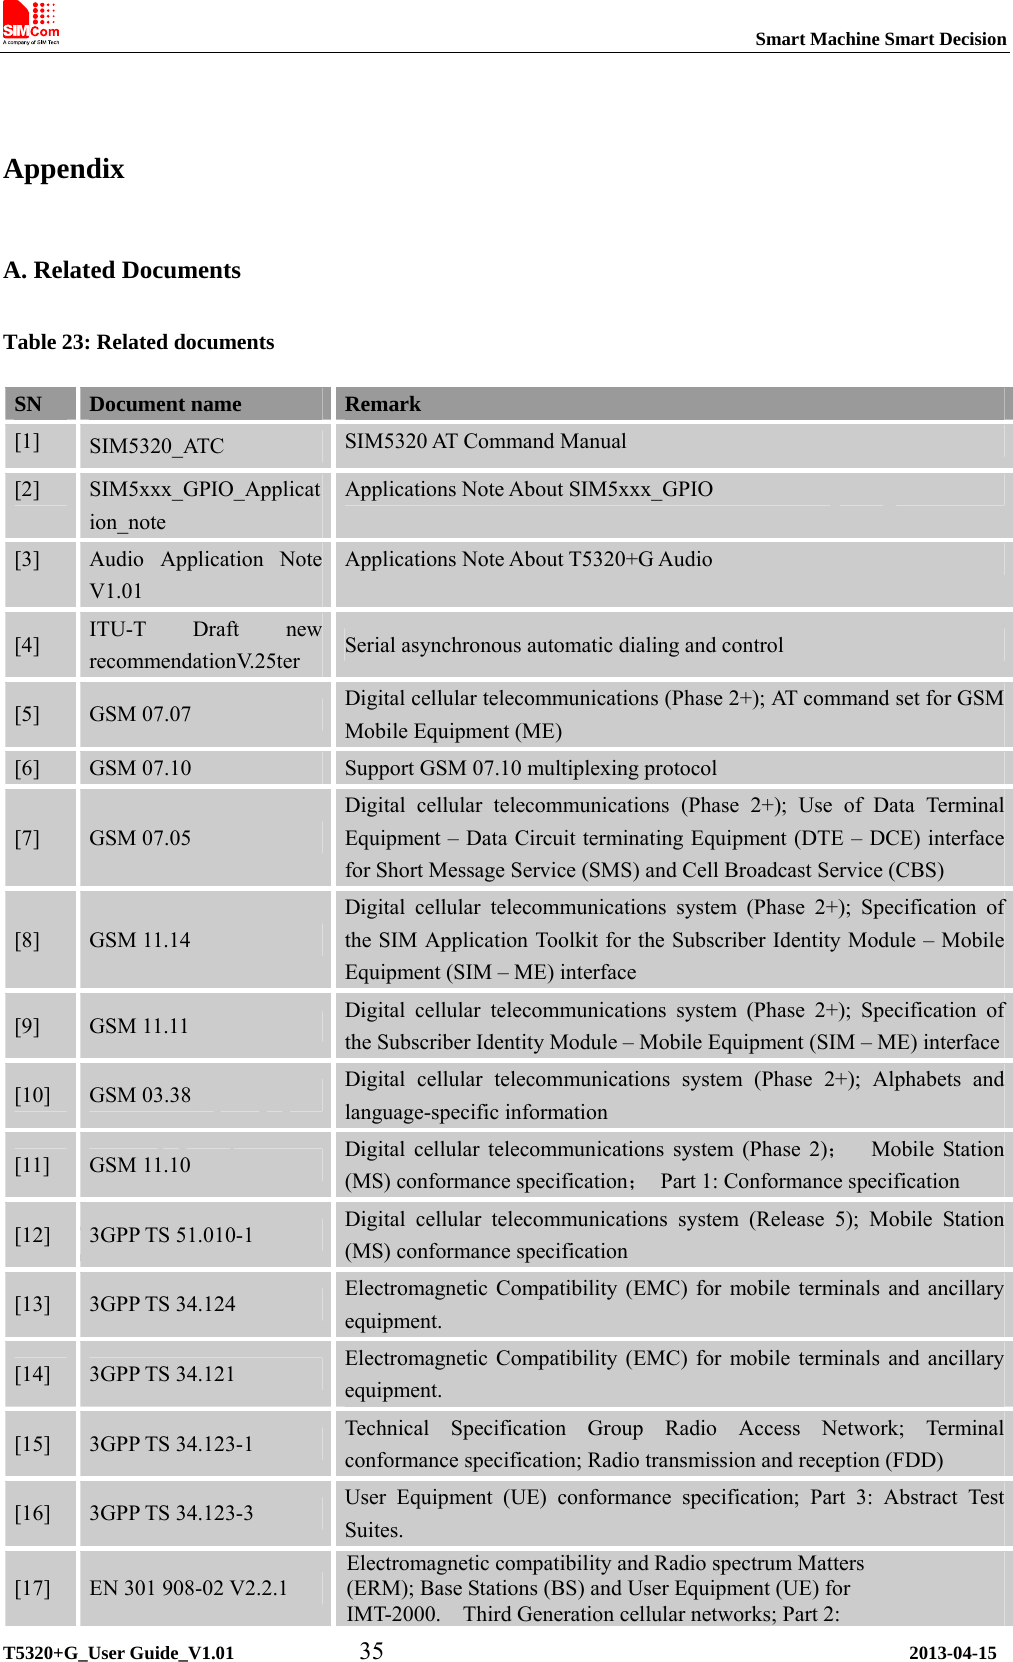                                                                           Smart Machine Smart Decision             T5320+G_User Guide_V1.01          35                                          2013-04-15  Appendix A. Related Documents Table 23: Related documents SN  Document name  Remark [1]  SIM5320_ATC  SIM5320 AT Command Manual [2]  SIM5xxx_GPIO_Application_note Applications Note About SIM5xxx_GPIO [3]  Audio Application Note V1.01 Applications Note About T5320+G Audio [4]  ITU-T Draft new recommendationV.25ter  Serial asynchronous automatic dialing and control [5]  GSM 07.07  Digital cellular telecommunications (Phase 2+); AT command set for GSM Mobile Equipment (ME) [6]  GSM 07.10  Support GSM 07.10 multiplexing protocol   [7]  GSM 07.05 Digital cellular telecommunications (Phase 2+); Use of Data Terminal Equipment – Data Circuit terminating Equipment (DTE – DCE) interface for Short Message Service (SMS) and Cell Broadcast Service (CBS) [8]  GSM 11.14 Digital cellular telecommunications system (Phase 2+); Specification of the SIM Application Toolkit for the Subscriber Identity Module – Mobile Equipment (SIM – ME) interface [9]  GSM 11.11  Digital cellular telecommunications system (Phase 2+); Specification of the Subscriber Identity Module – Mobile Equipment (SIM – ME) interface[10]  GSM 03.38  Digital cellular telecommunications system (Phase 2+); Alphabets and language-specific information [11]  GSM 11.10  Digital cellular telecommunications system (Phase 2)；  Mobile Station (MS) conformance specification；  Part 1: Conformance specification [12]  3GPP TS 51.010-1  Digital cellular telecommunications system (Release 5); Mobile Station (MS) conformance specification [13]  3GPP TS 34.124  Electromagnetic Compatibility (EMC) for mobile terminals and ancillary equipment. [14]  3GPP TS 34.121  Electromagnetic Compatibility (EMC) for mobile terminals and ancillary equipment. [15]  3GPP TS 34.123-1  Technical Specification Group Radio Access Network; Terminal conformance specification; Radio transmission and reception (FDD) [16]  3GPP TS 34.123-3  User Equipment (UE) conformance specification; Part 3: Abstract Test Suites. [17]  EN 301 908-02 V2.2.1 Electromagnetic compatibility and Radio spectrum Matters   (ERM); Base Stations (BS) and User Equipment (UE) for   IMT-2000.    Third Generation cellular networks; Part 2:   